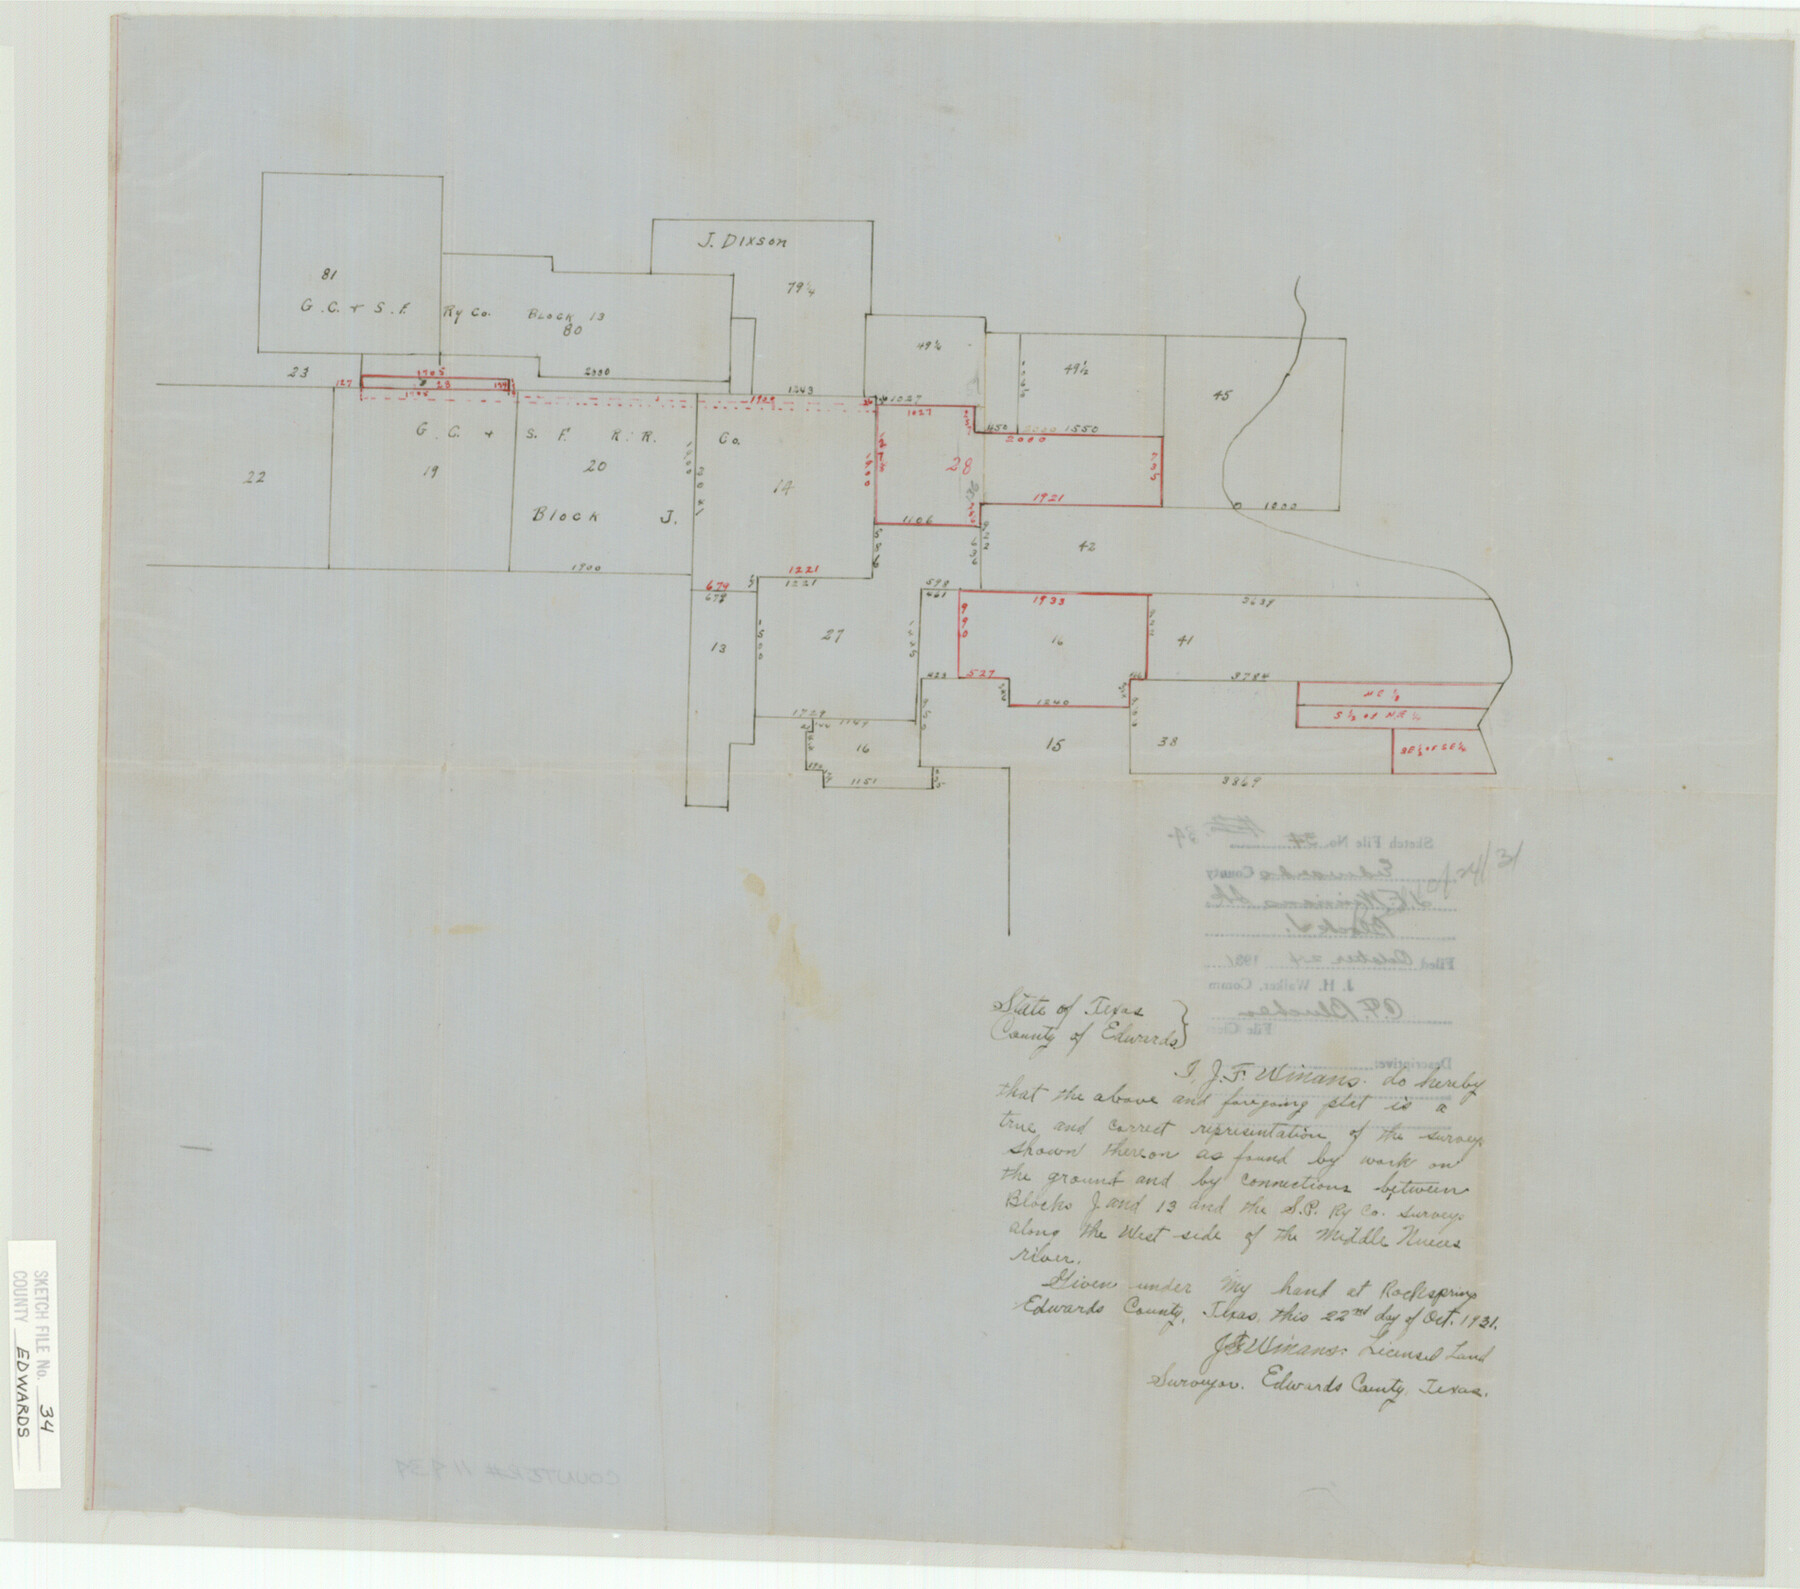 11434, Edwards County Sketch File 34, General Map Collection